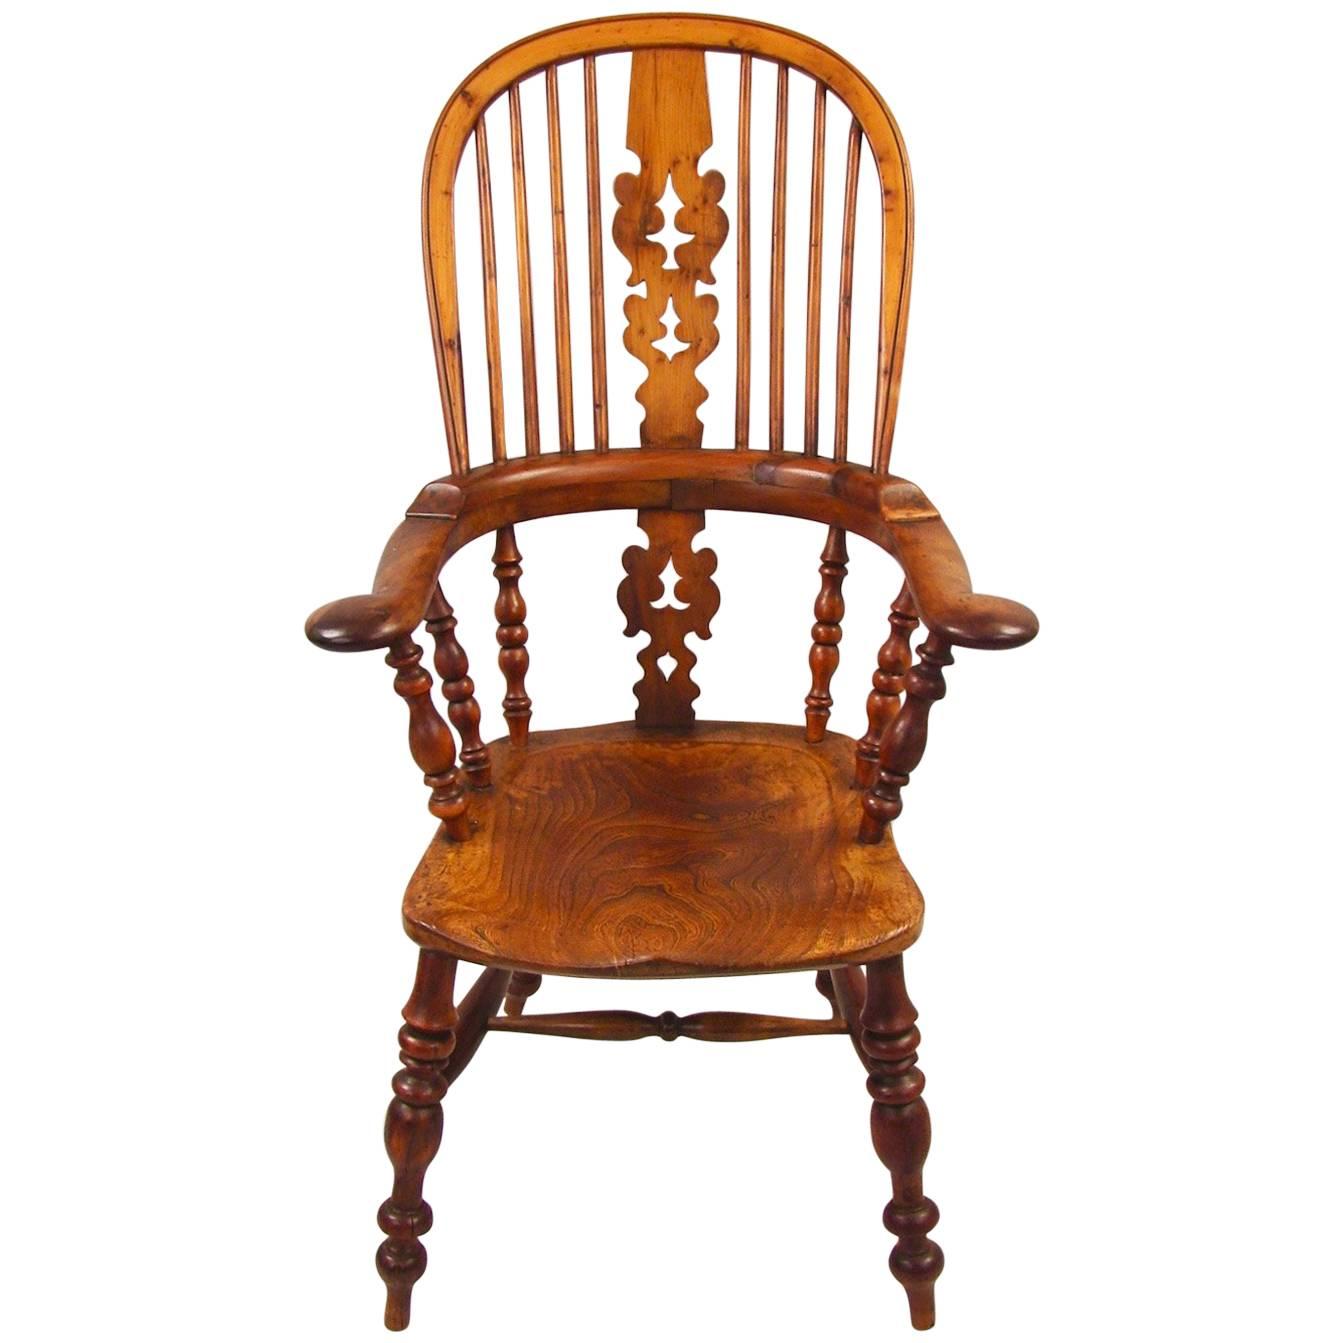 Yew Wood Broad Arm High Back Windsor Chair